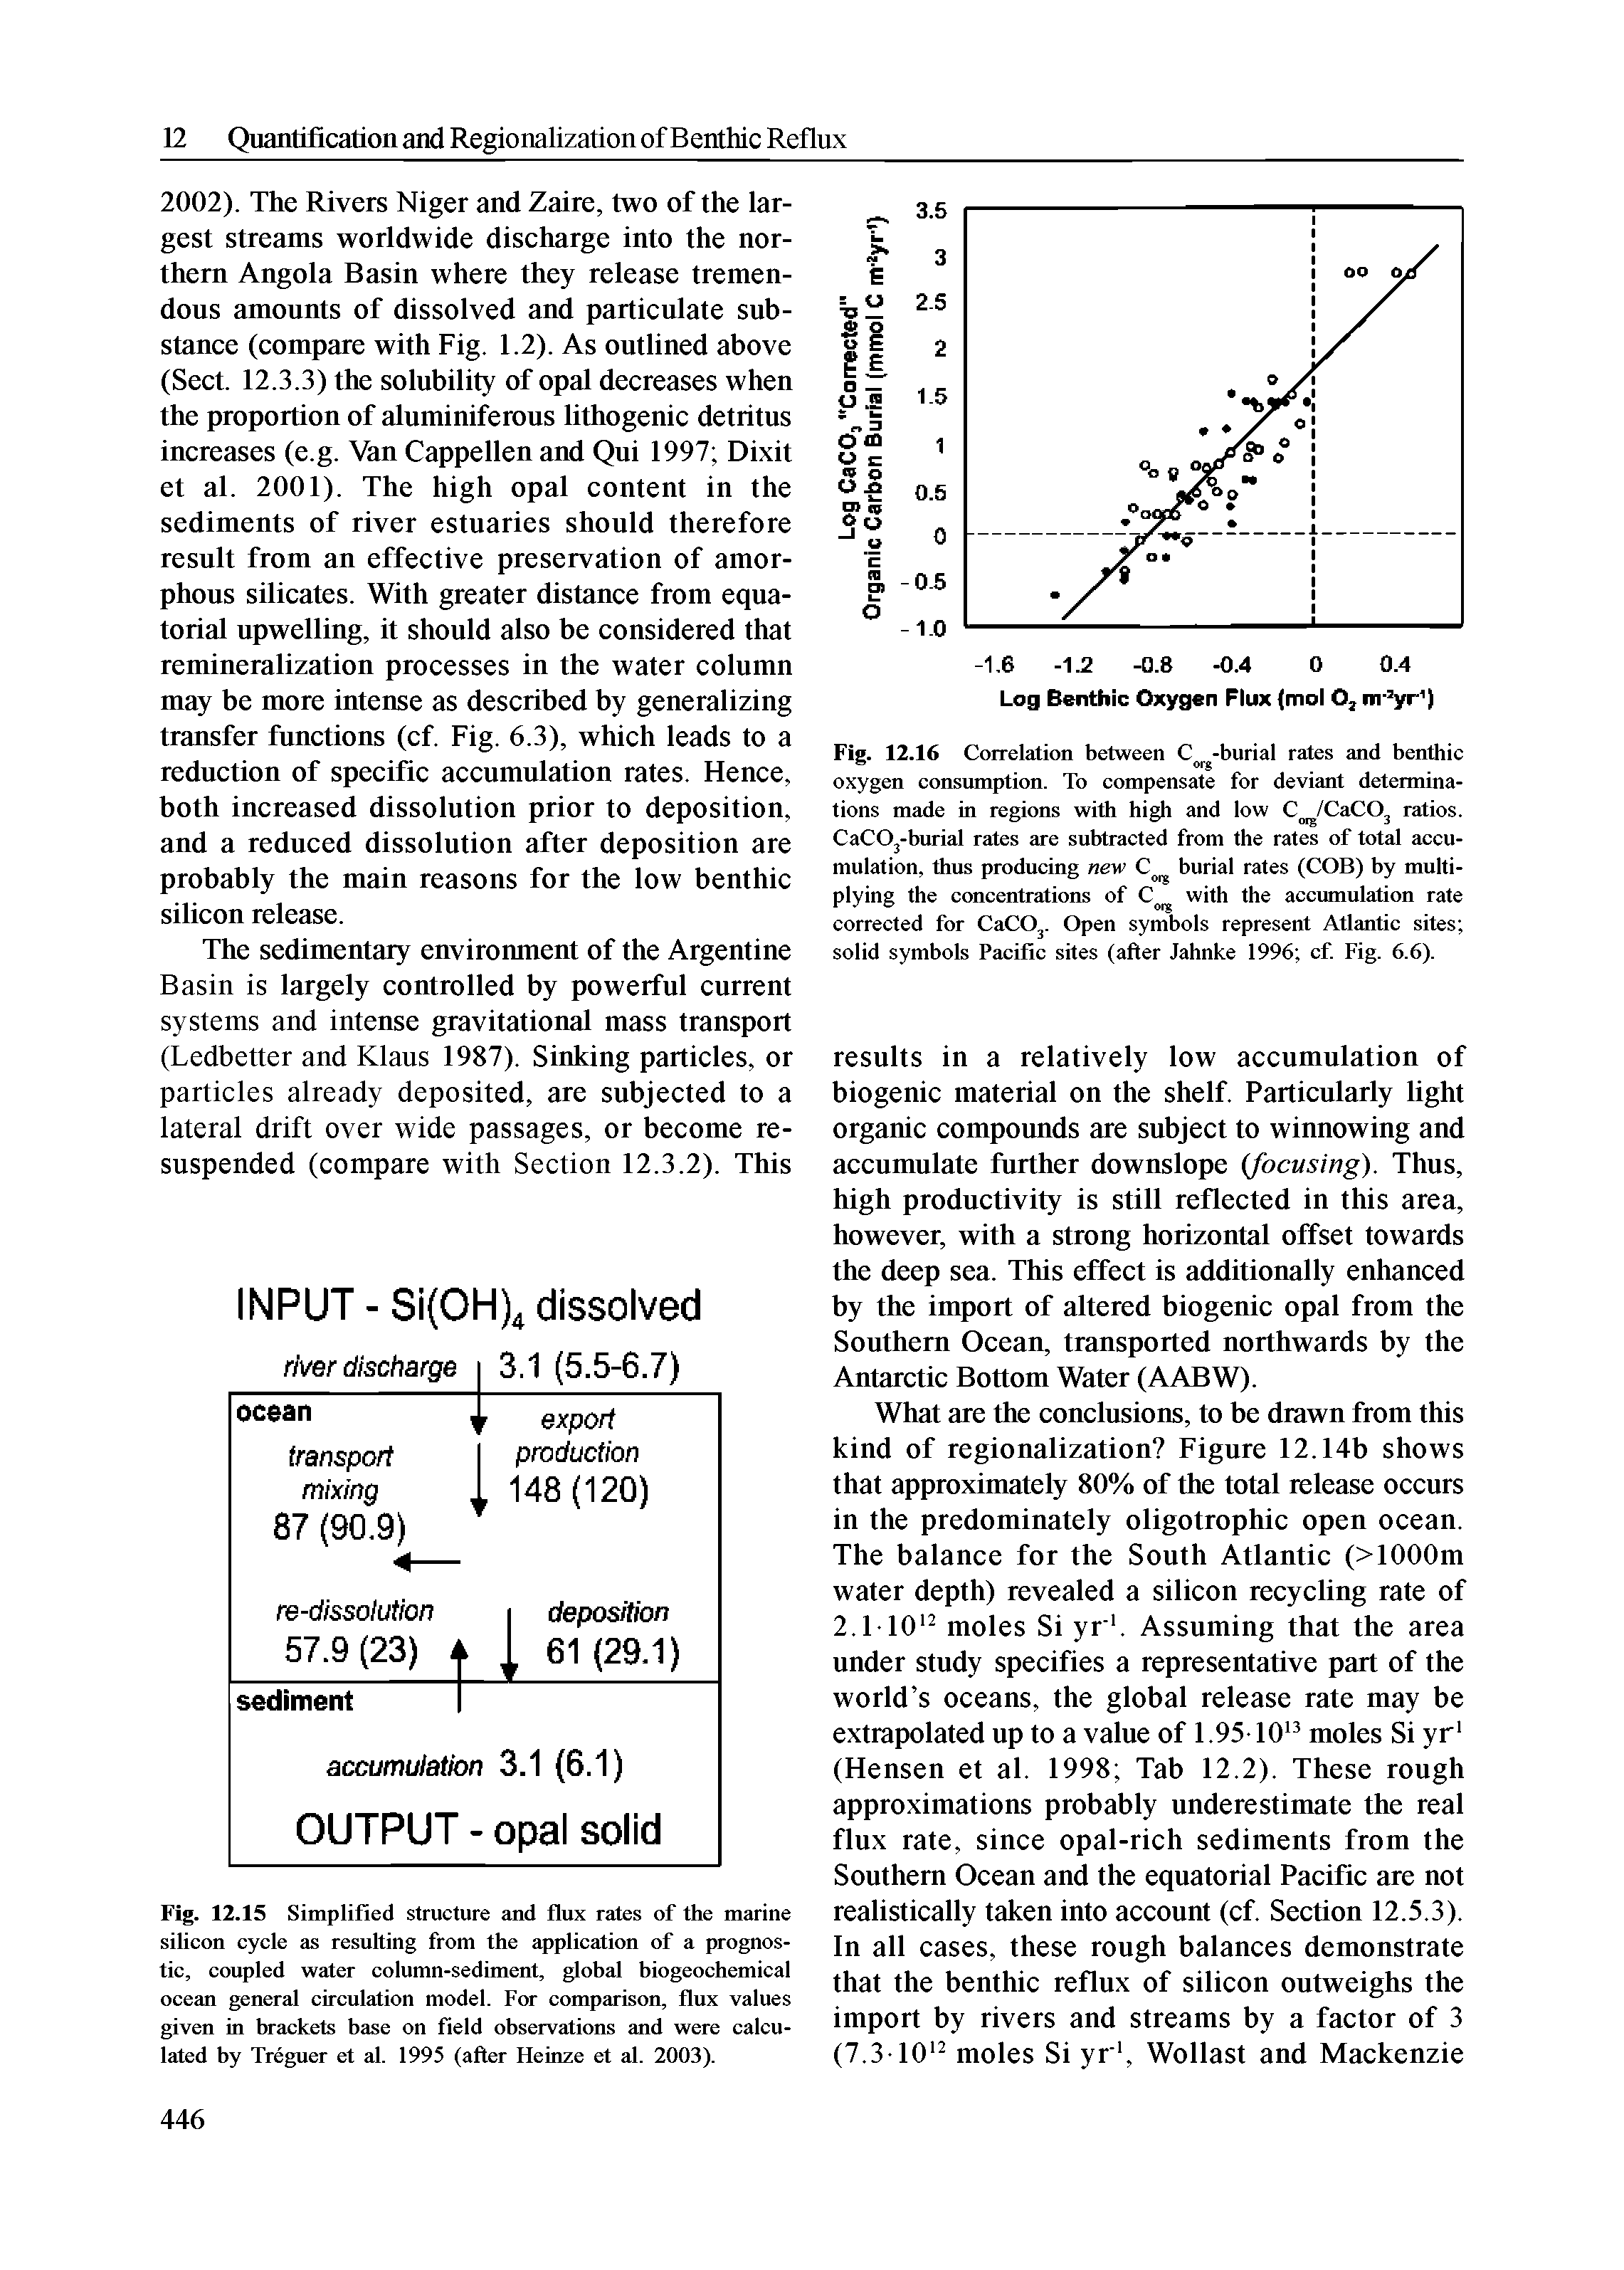 Fig. 12.15 Simplified structure and flux rates of the marine silicon cycle as resulting from the application of a prognostic, coupled water column-sediment, global biogeochemical ocean general circulation model. For comparison, flux values given in brackets base on field observations and were calculated by Treguer et al. 1995 (after Heinze et al. 2003).